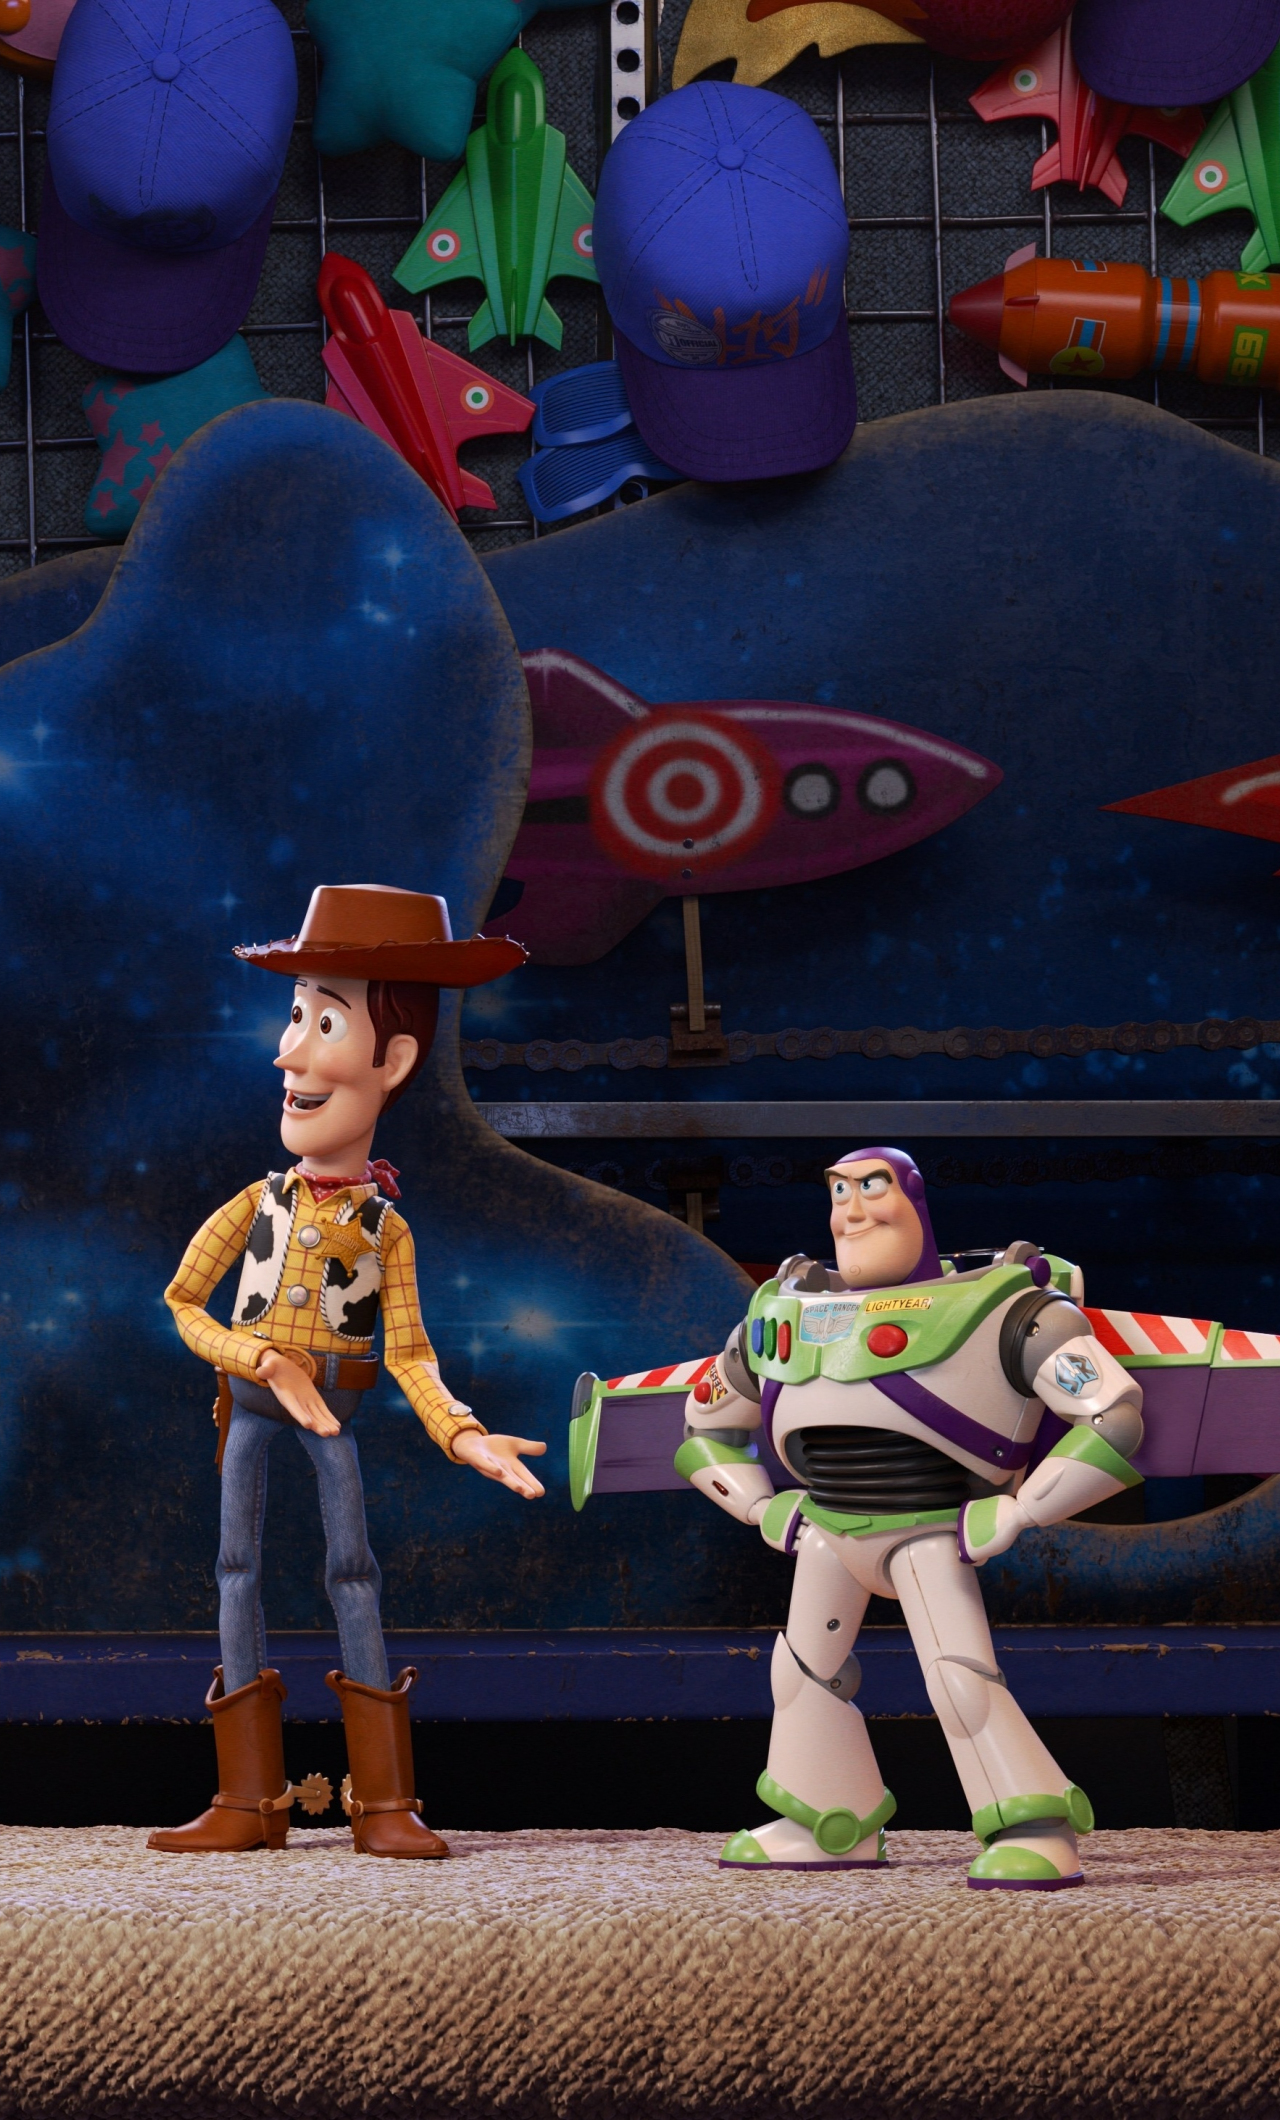 Download Wallpaper 1280x2120 Toy Story 4 Woody Buzz Lightyear